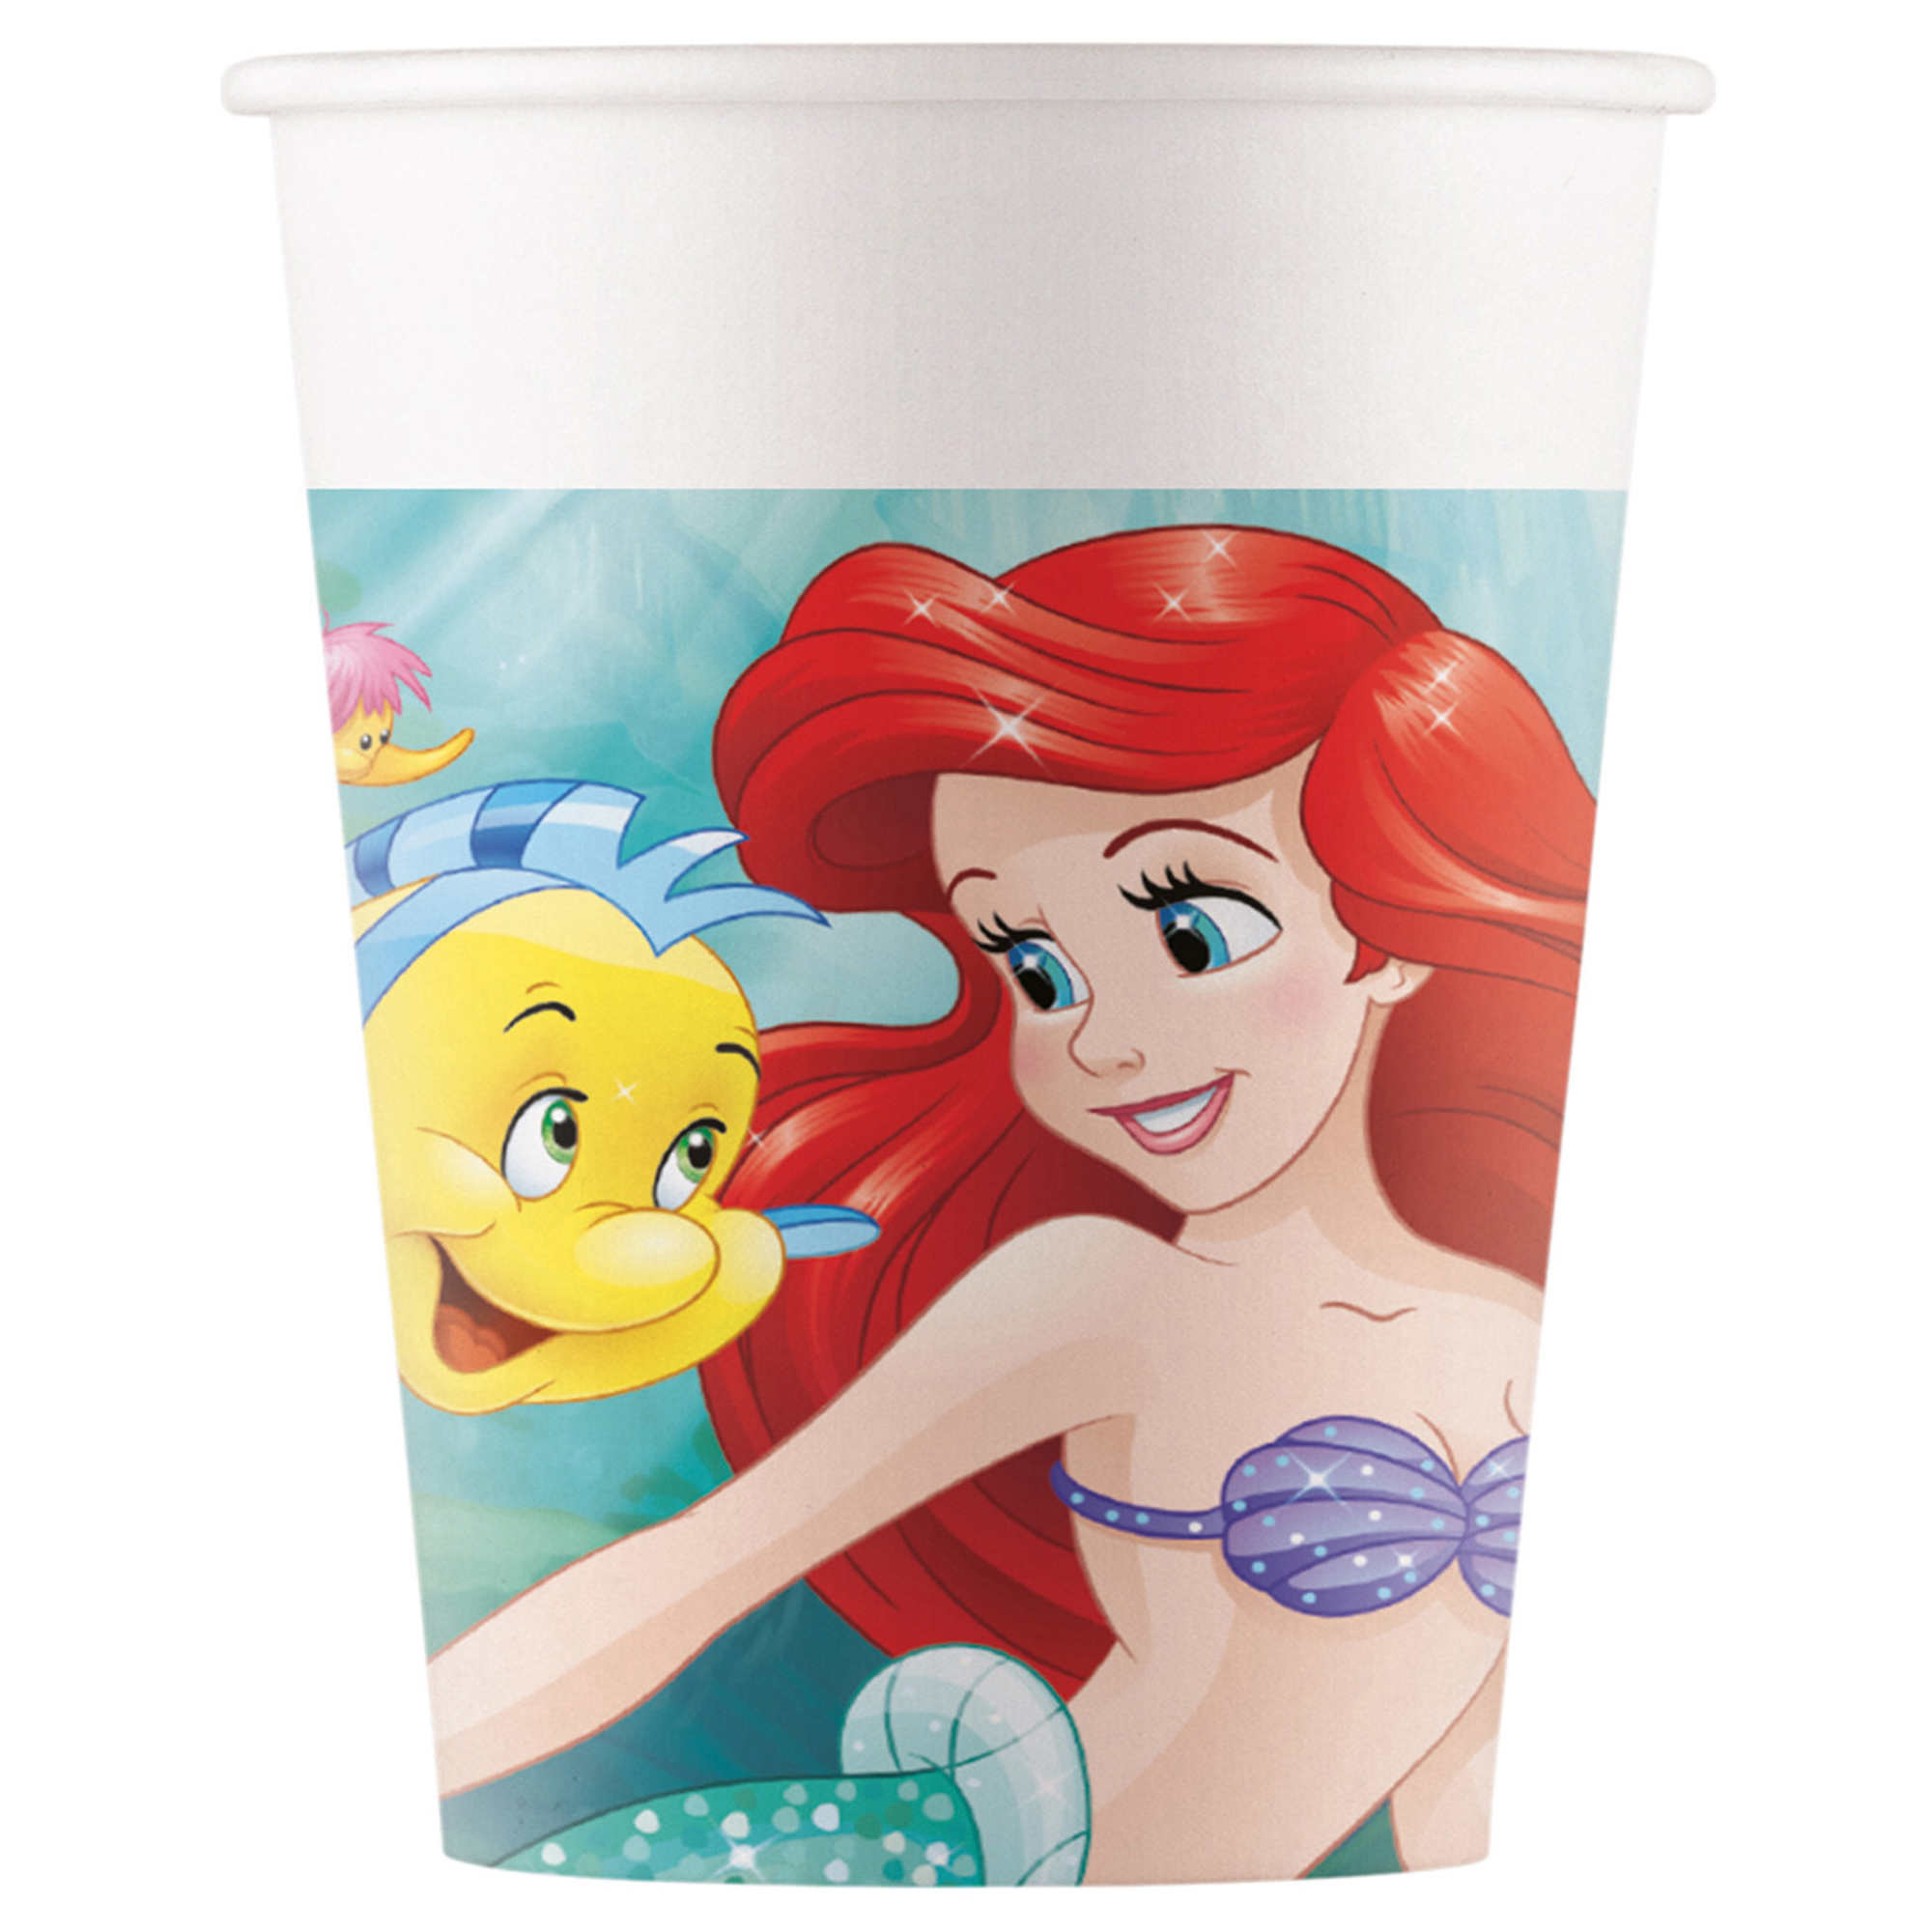 The Little Mermaid Party Tableware & Decorations Bundle - 16 Guests